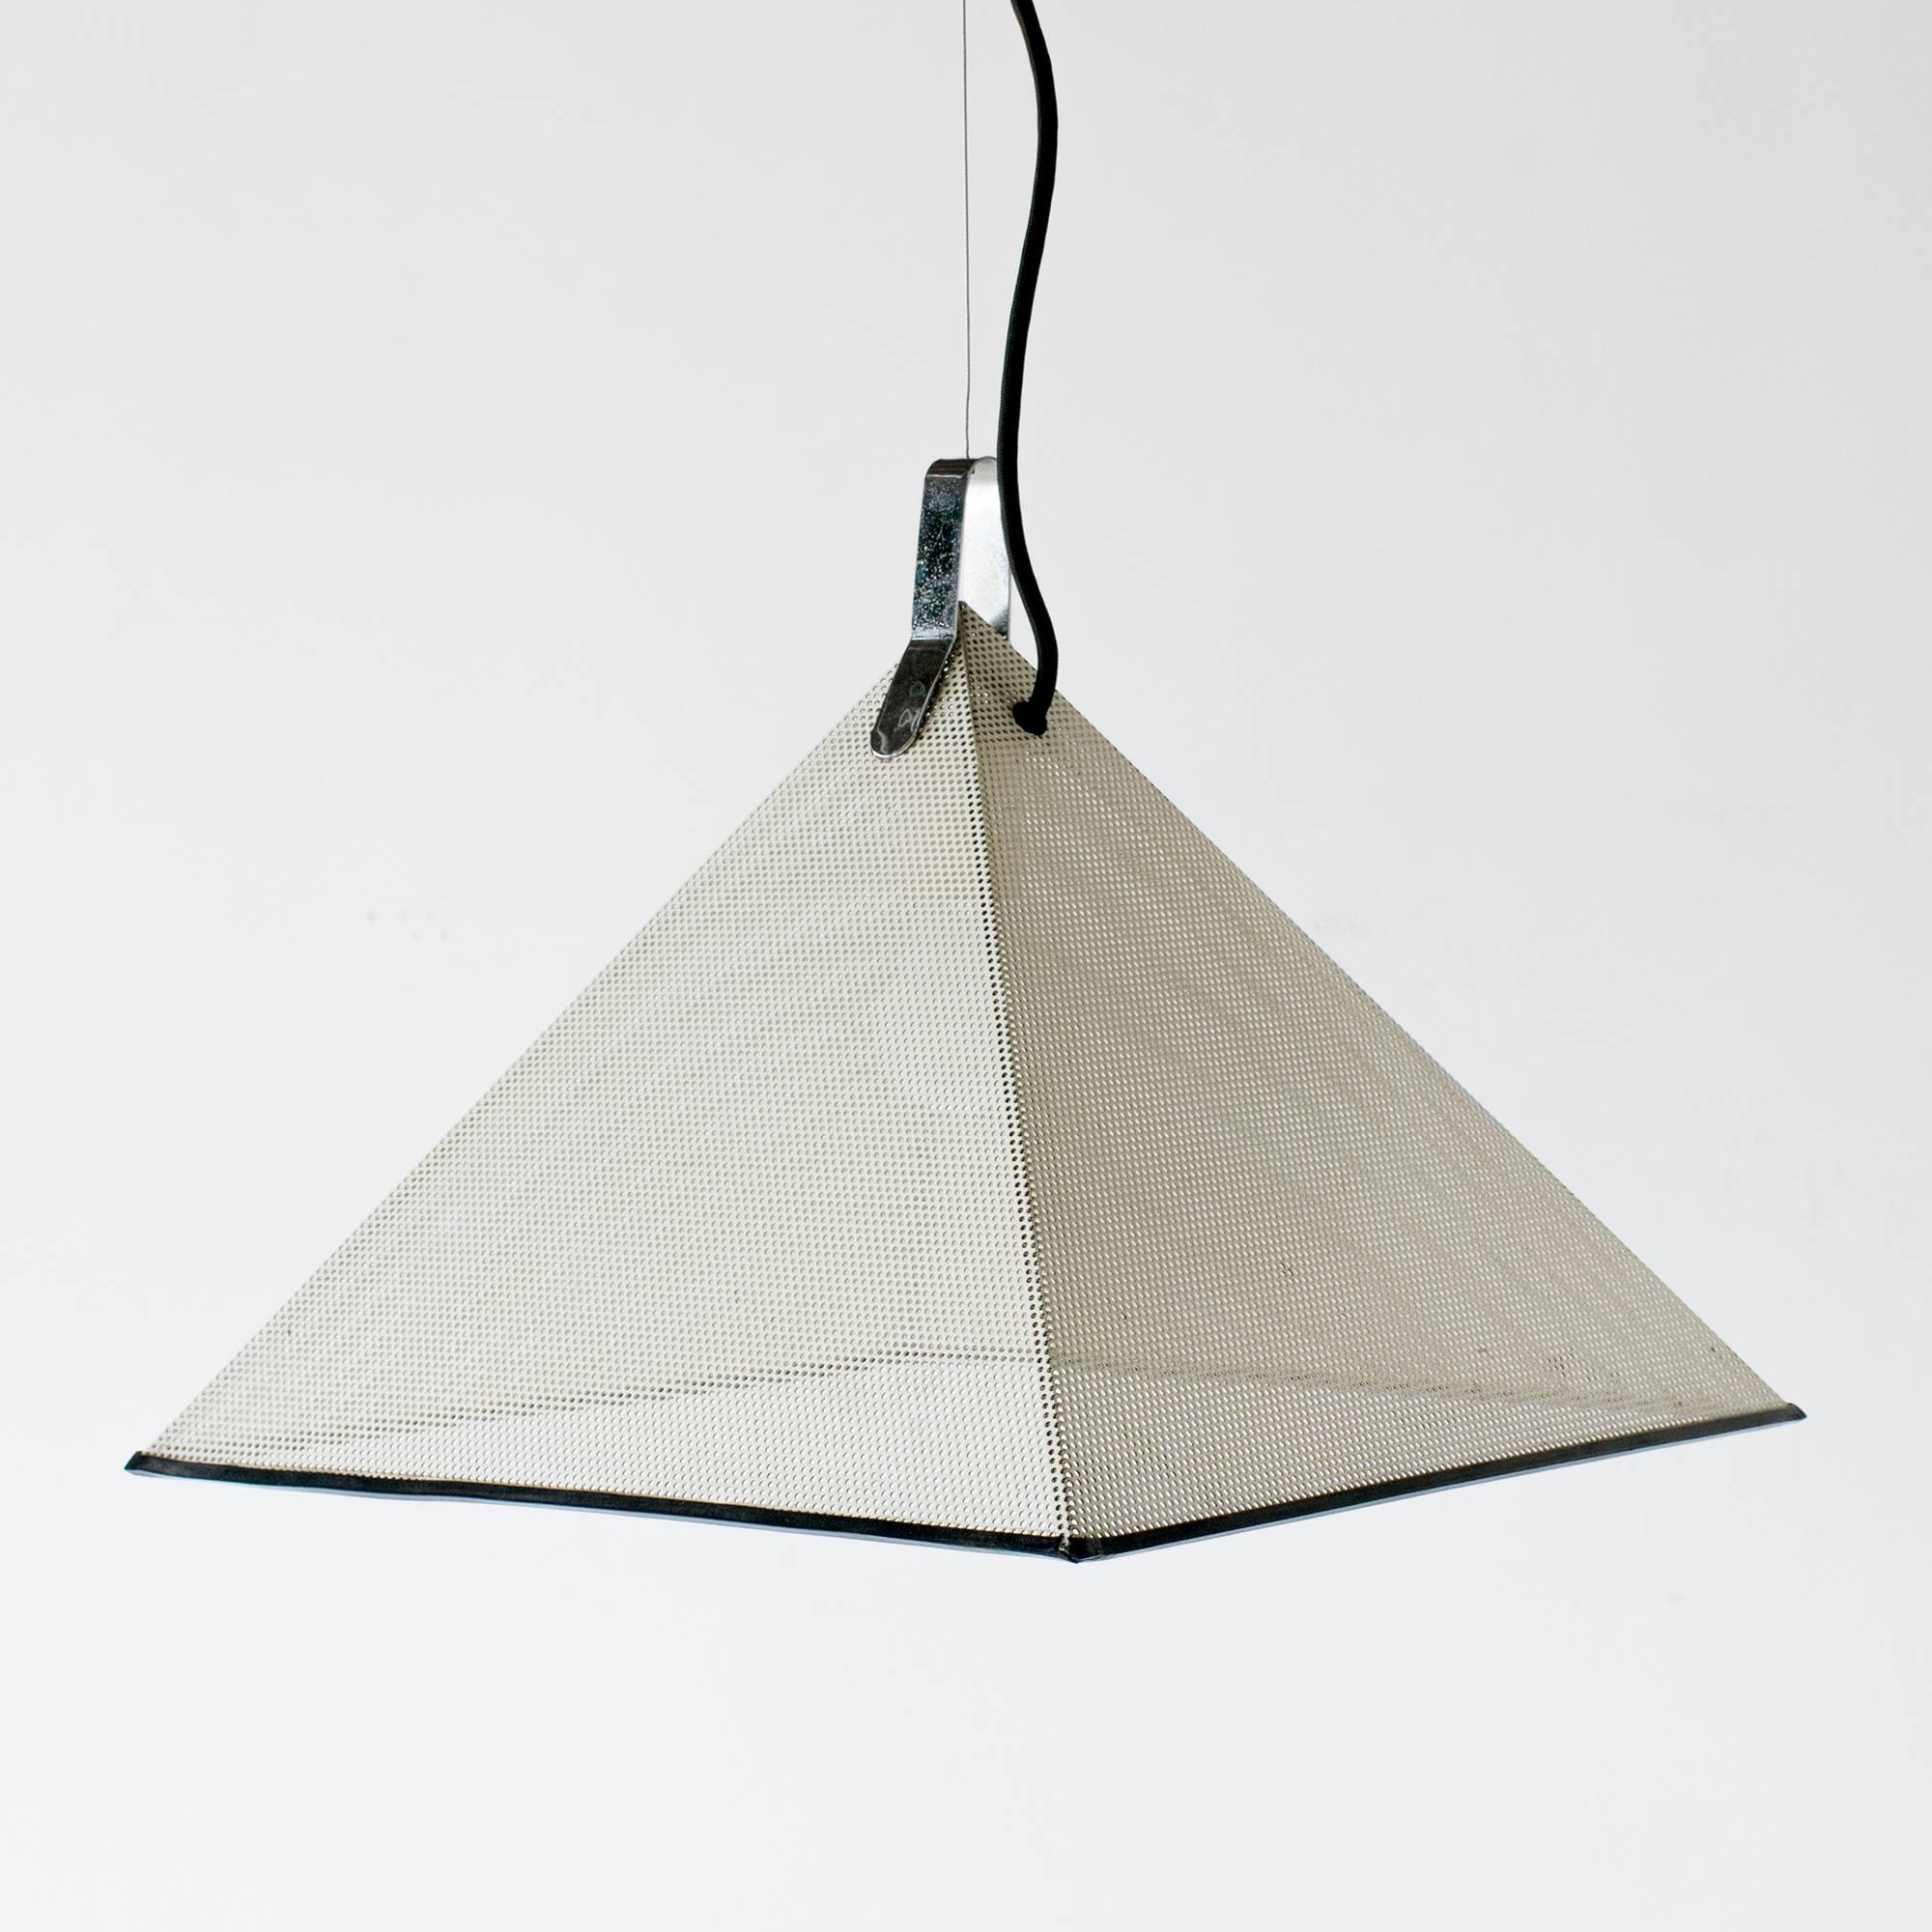 Trimesh pendant lamp designed by Shohei Mihara for Yamagiwa.
Shade is white. Punching metal shade can be able to pass the light beam.